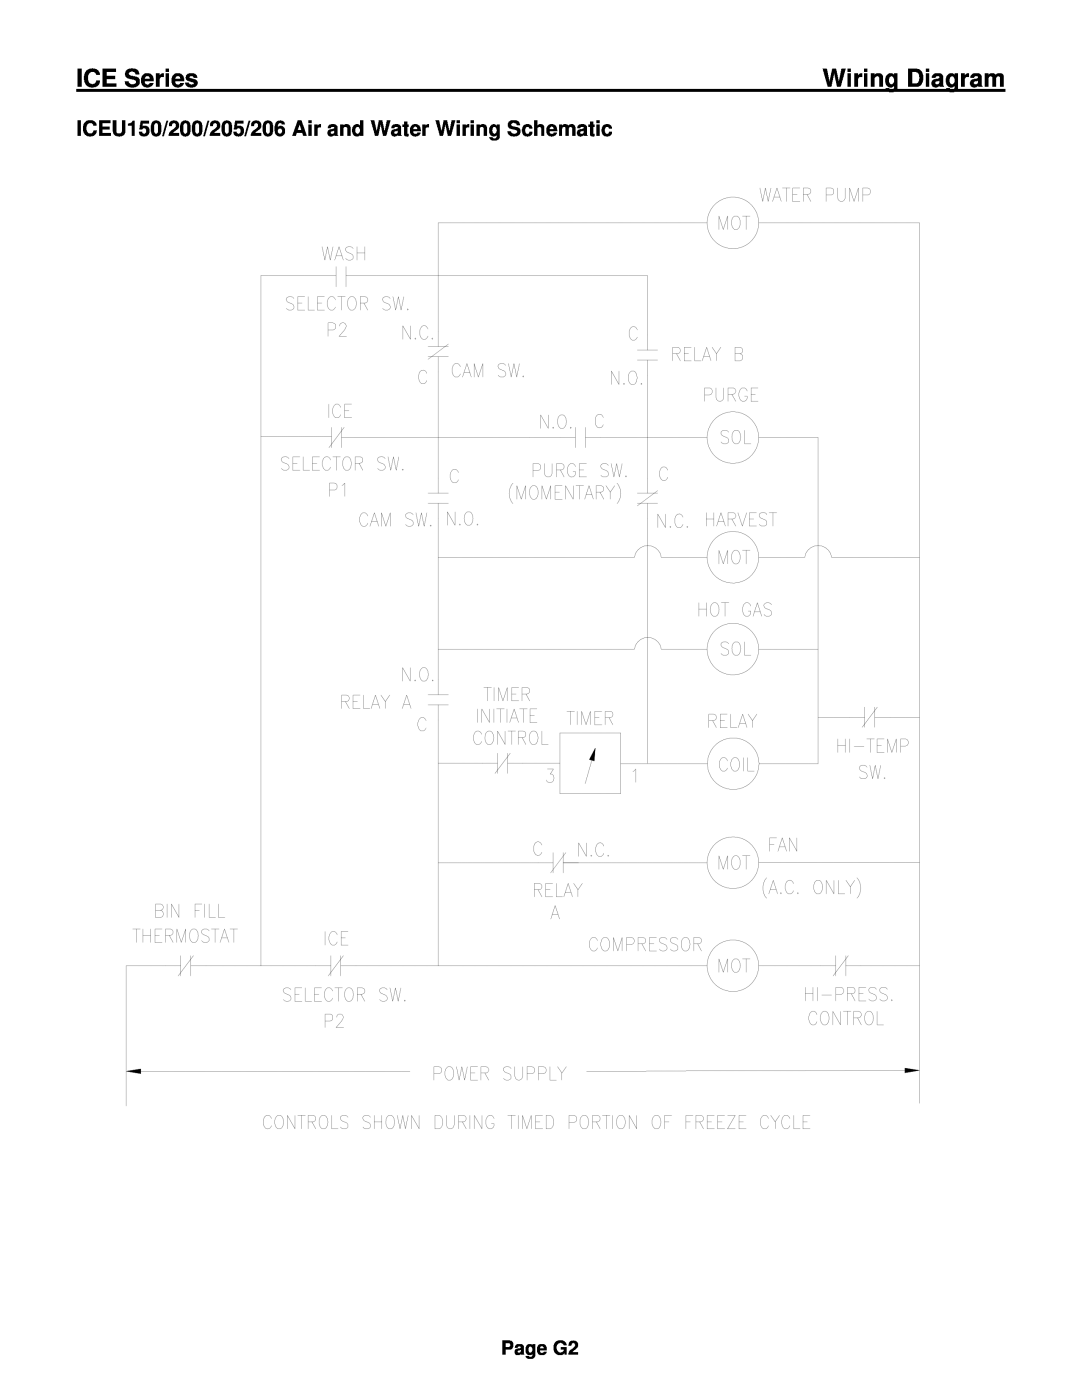 Ice-O-Matic ICE0250 Series ICEU150/200/205/206 Air and Water Wiring Schematic, ICE Series, Wiring Diagram, Page G2 